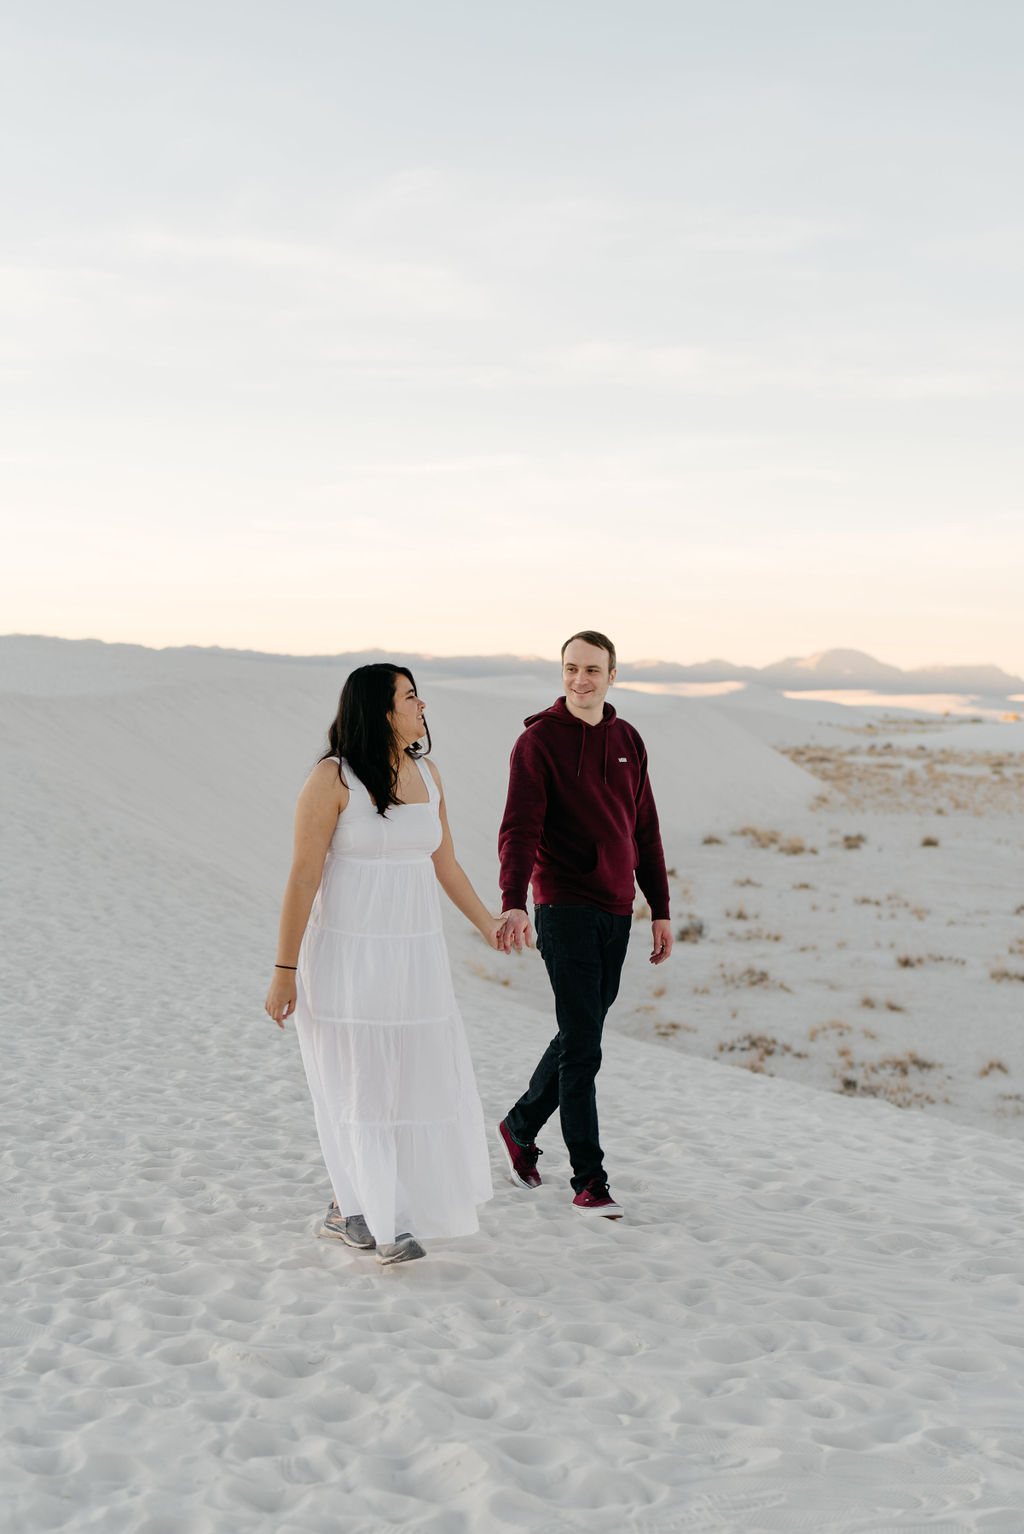 Romantic Walk on top of White Sand Dune in New Mexico